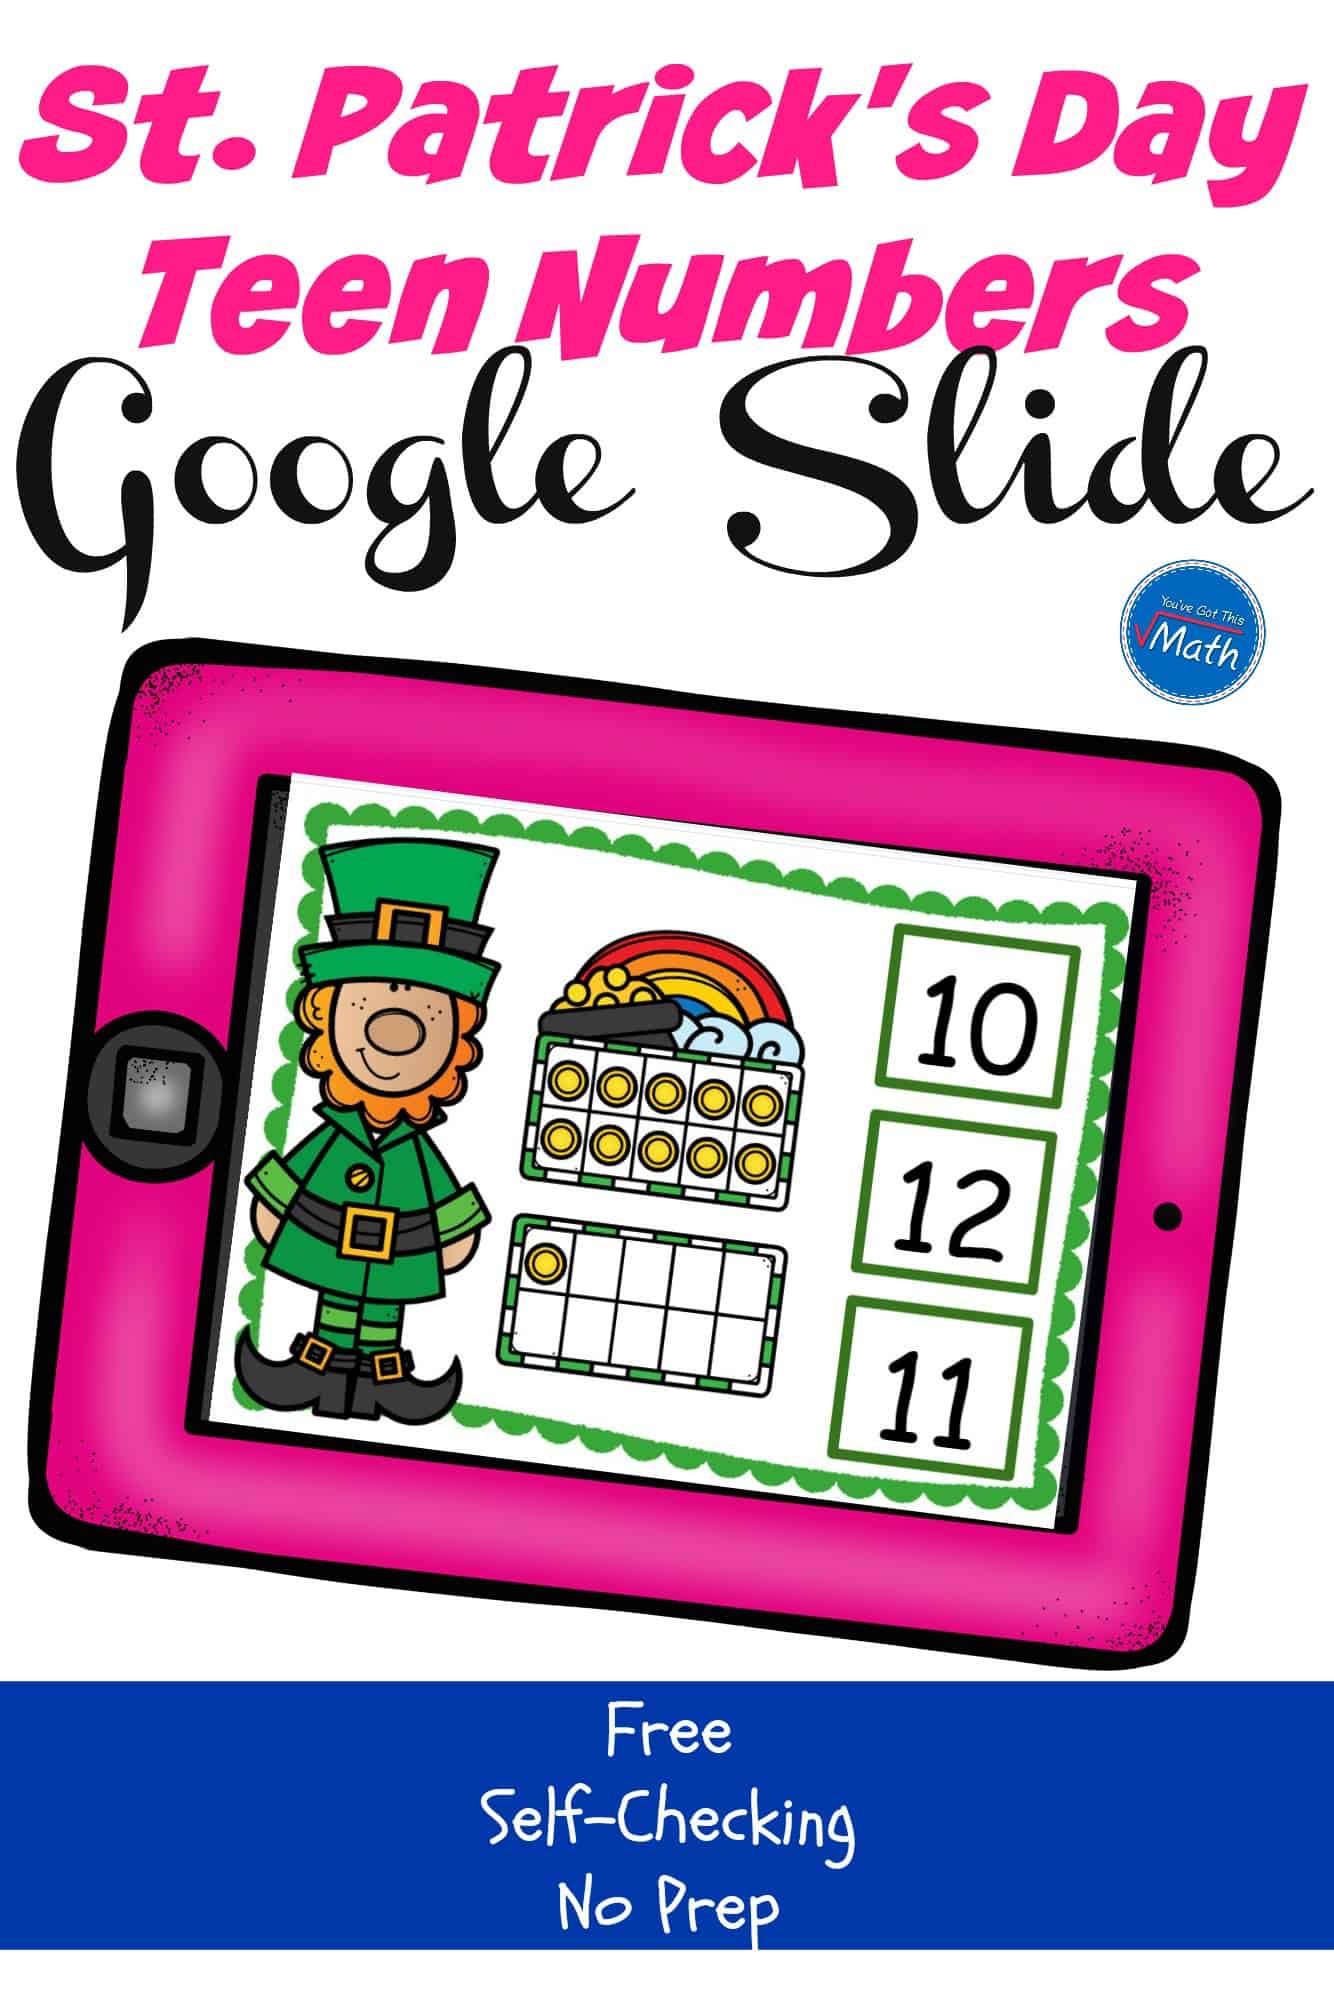 FREE St. Patrick's Day Teen Number Activity (Google Slides)